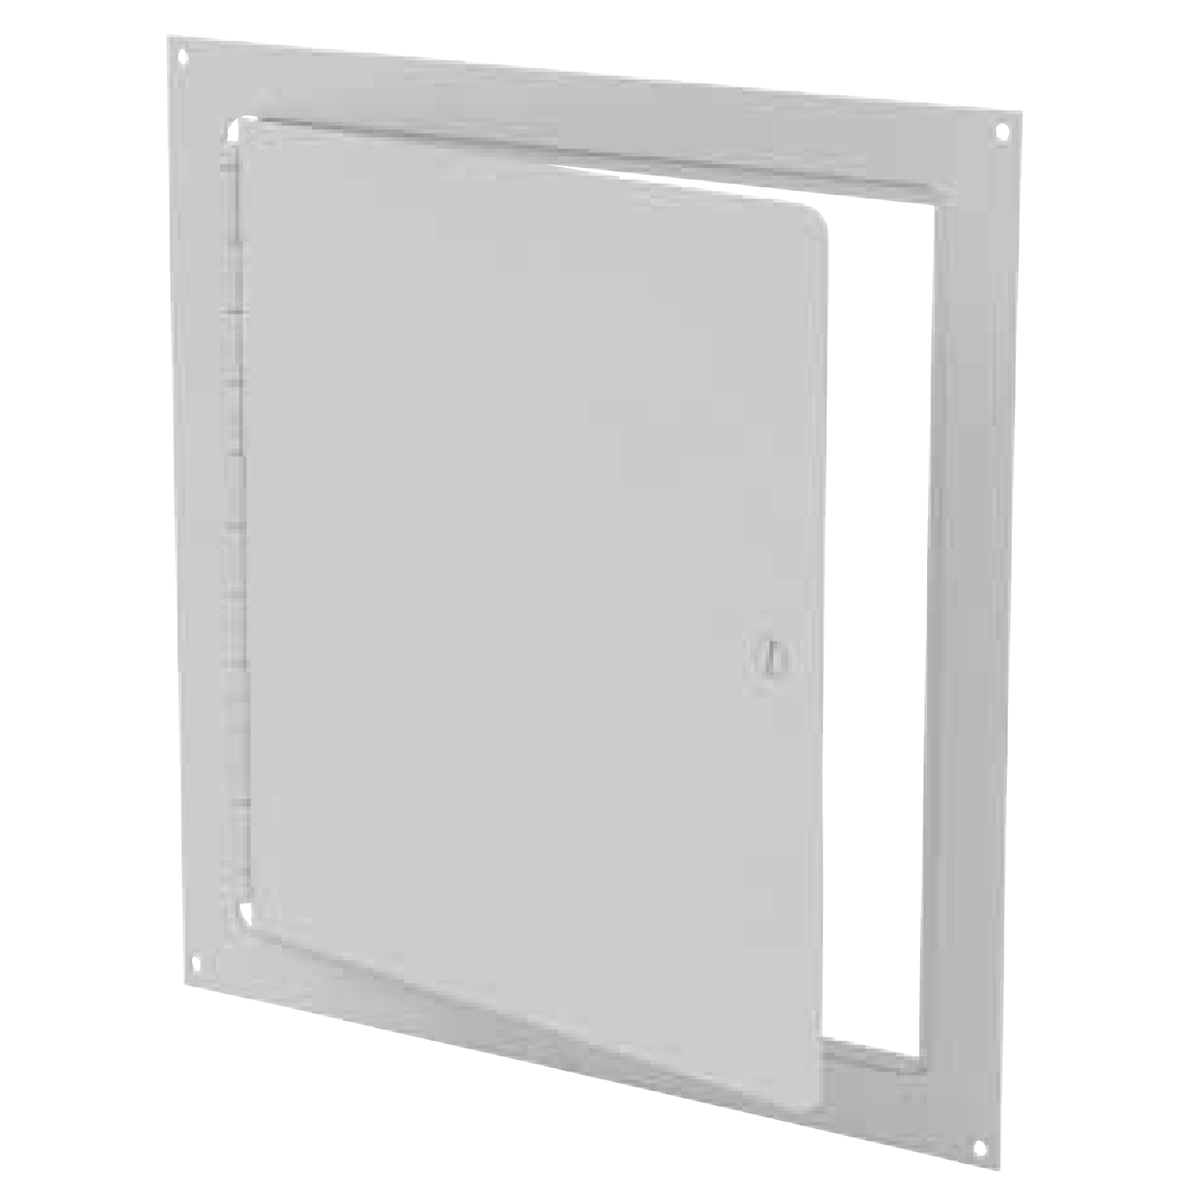 Access Door - E-SF 12x12 Surface Mount, Primer Coated Steel